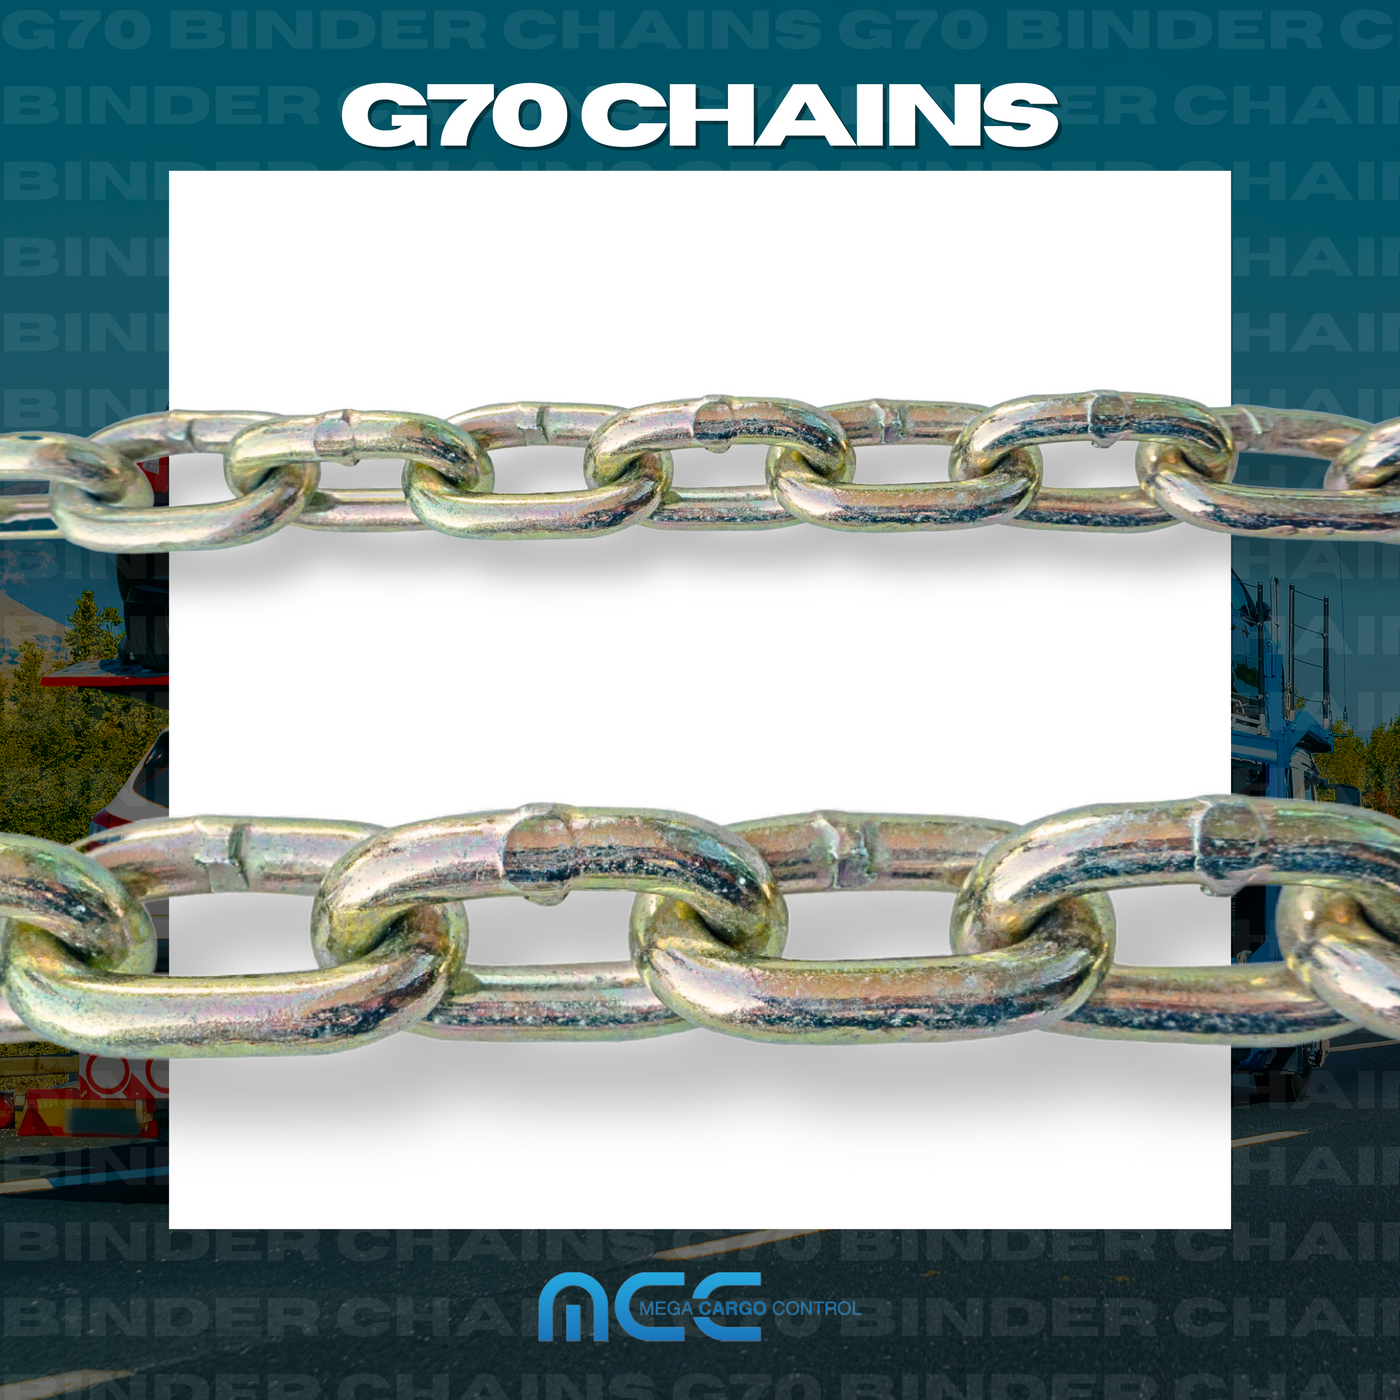 3/8 Inch G70 Tow Chain Binder Tie Down Flatbed Truck Trailer Chain with  Clevis Slip Hook with Latch - China Tow Chain, J Hook Tow Chain